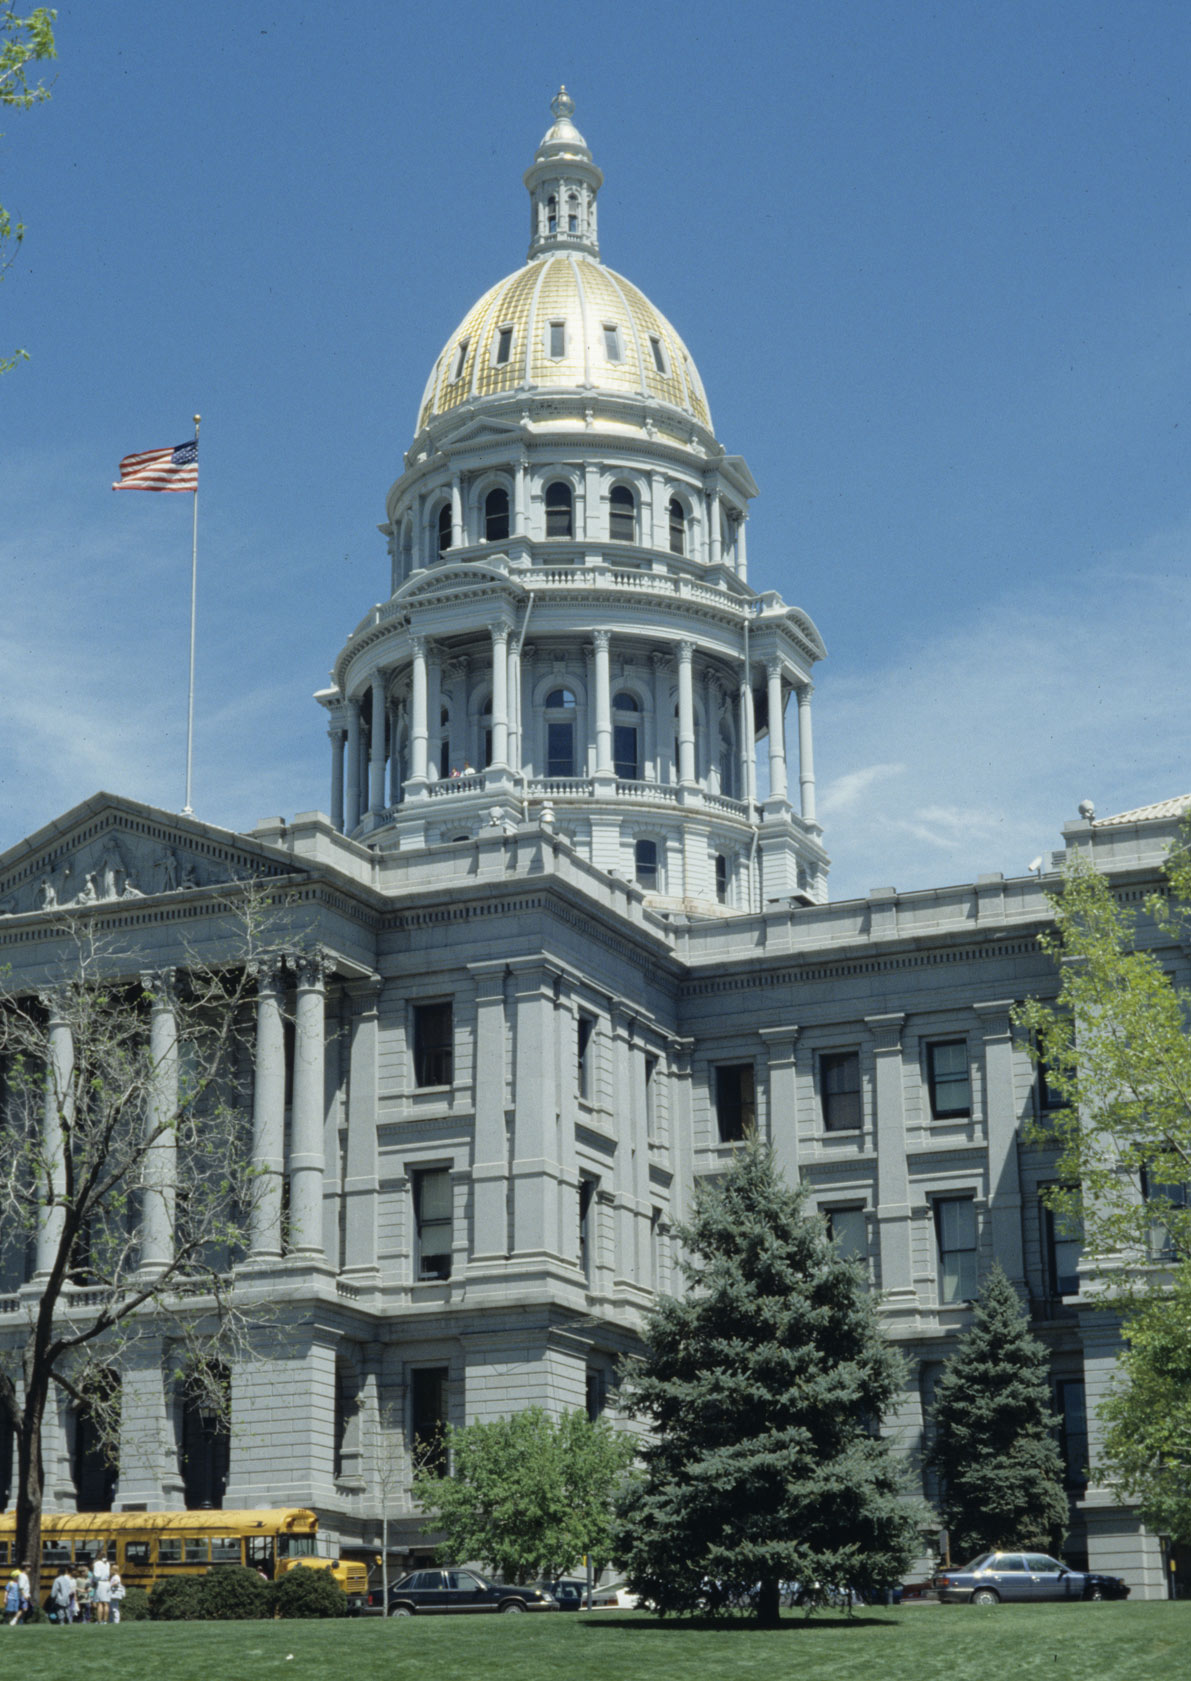 The State Capitol building in Denver.